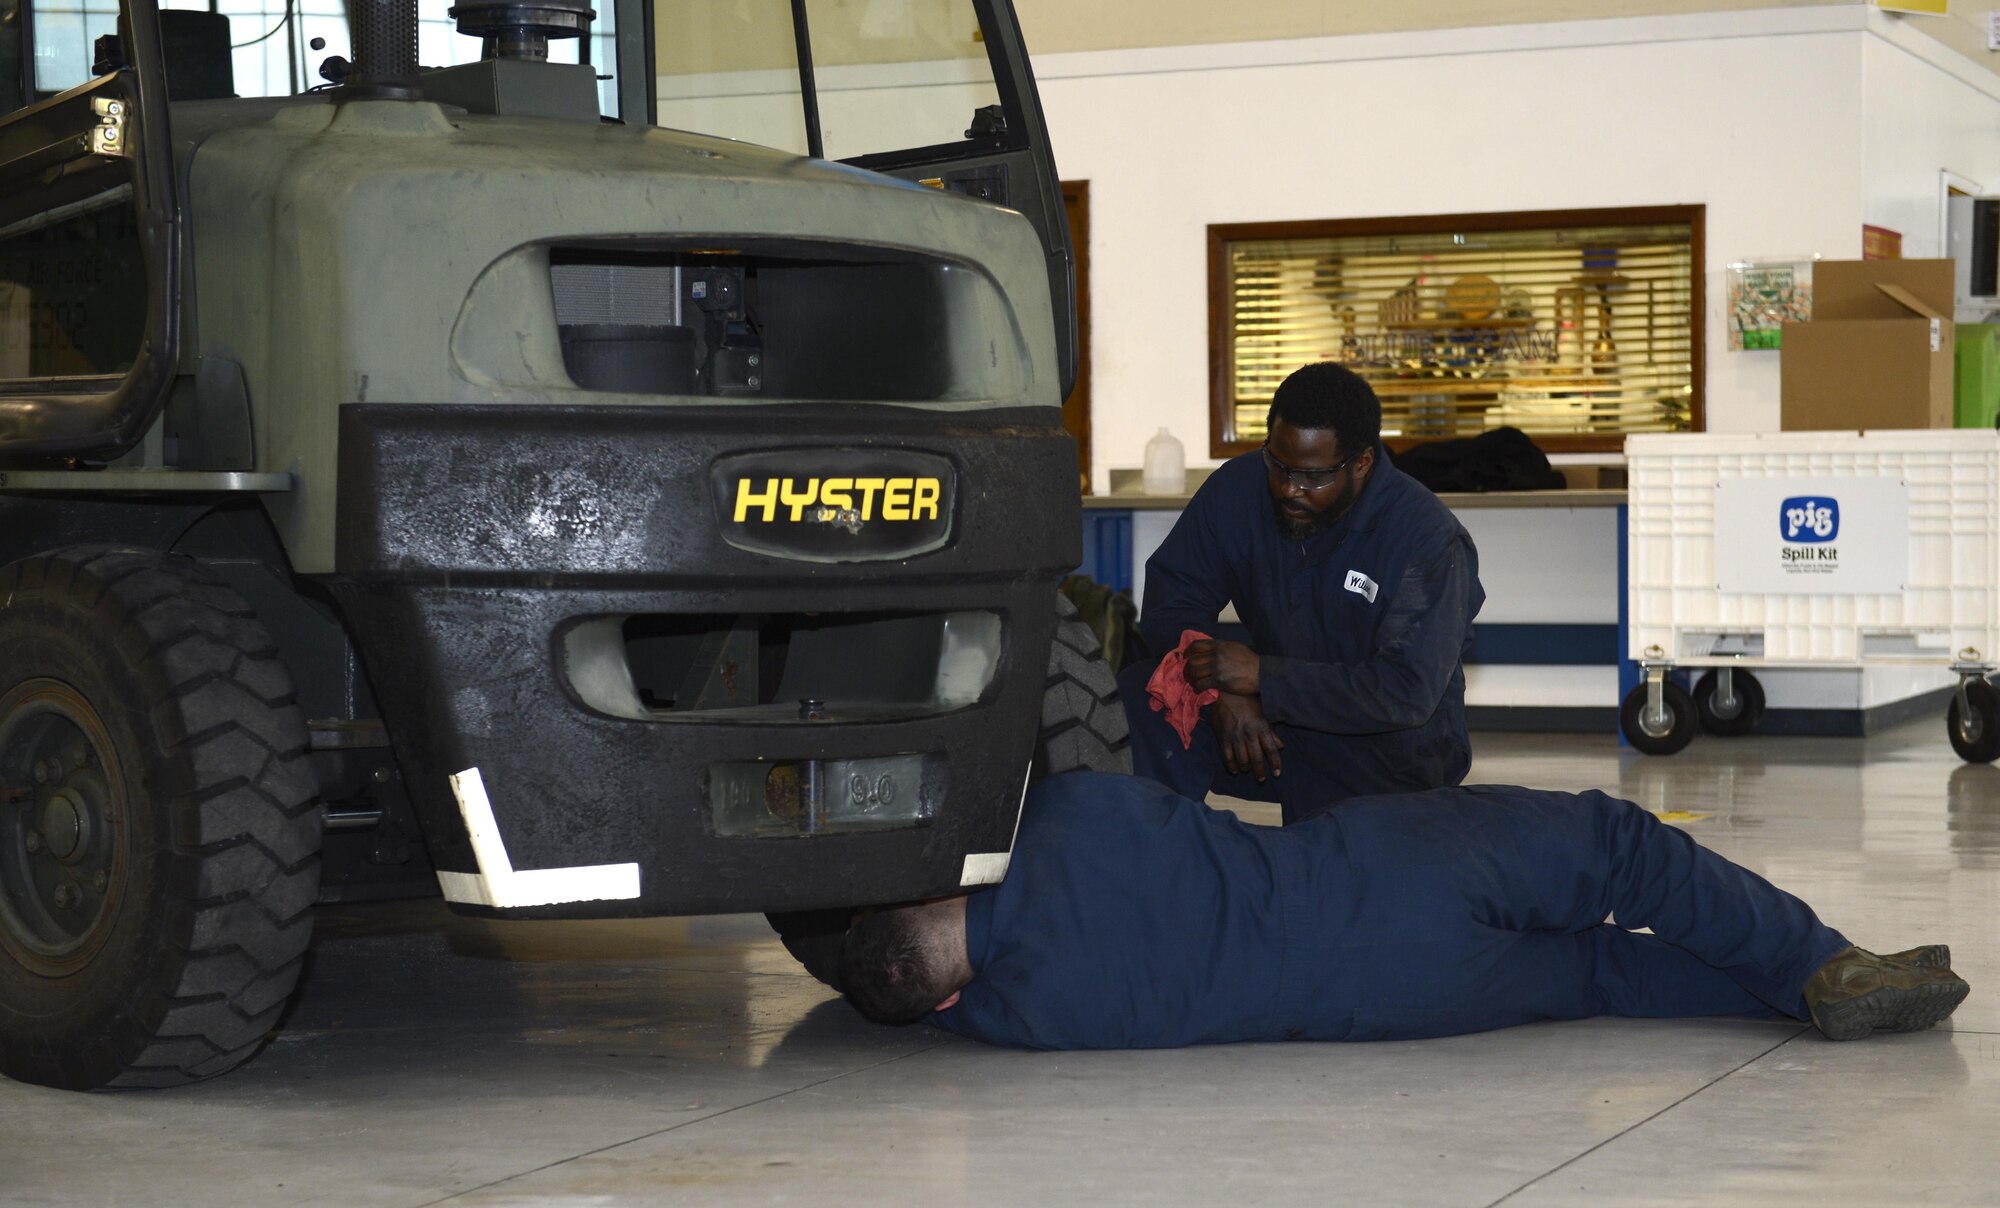 Walter Wilson and U.S. Air Force Airman 1st Class Nicholas Imber, 733rd Logistics Readiness Squadron vehicle maintainers, use a grease gun to squeeze bio-based grease into a forklift carriage at Joint Base Langley-Eustis, Va., Jan. 31, 2017. JBLE is one of four Air Force bases that will perform a 12-month long test of the grease on its vehicles. (U.S. Air Force photo by Airman 1st Class Kaylee Dubois)